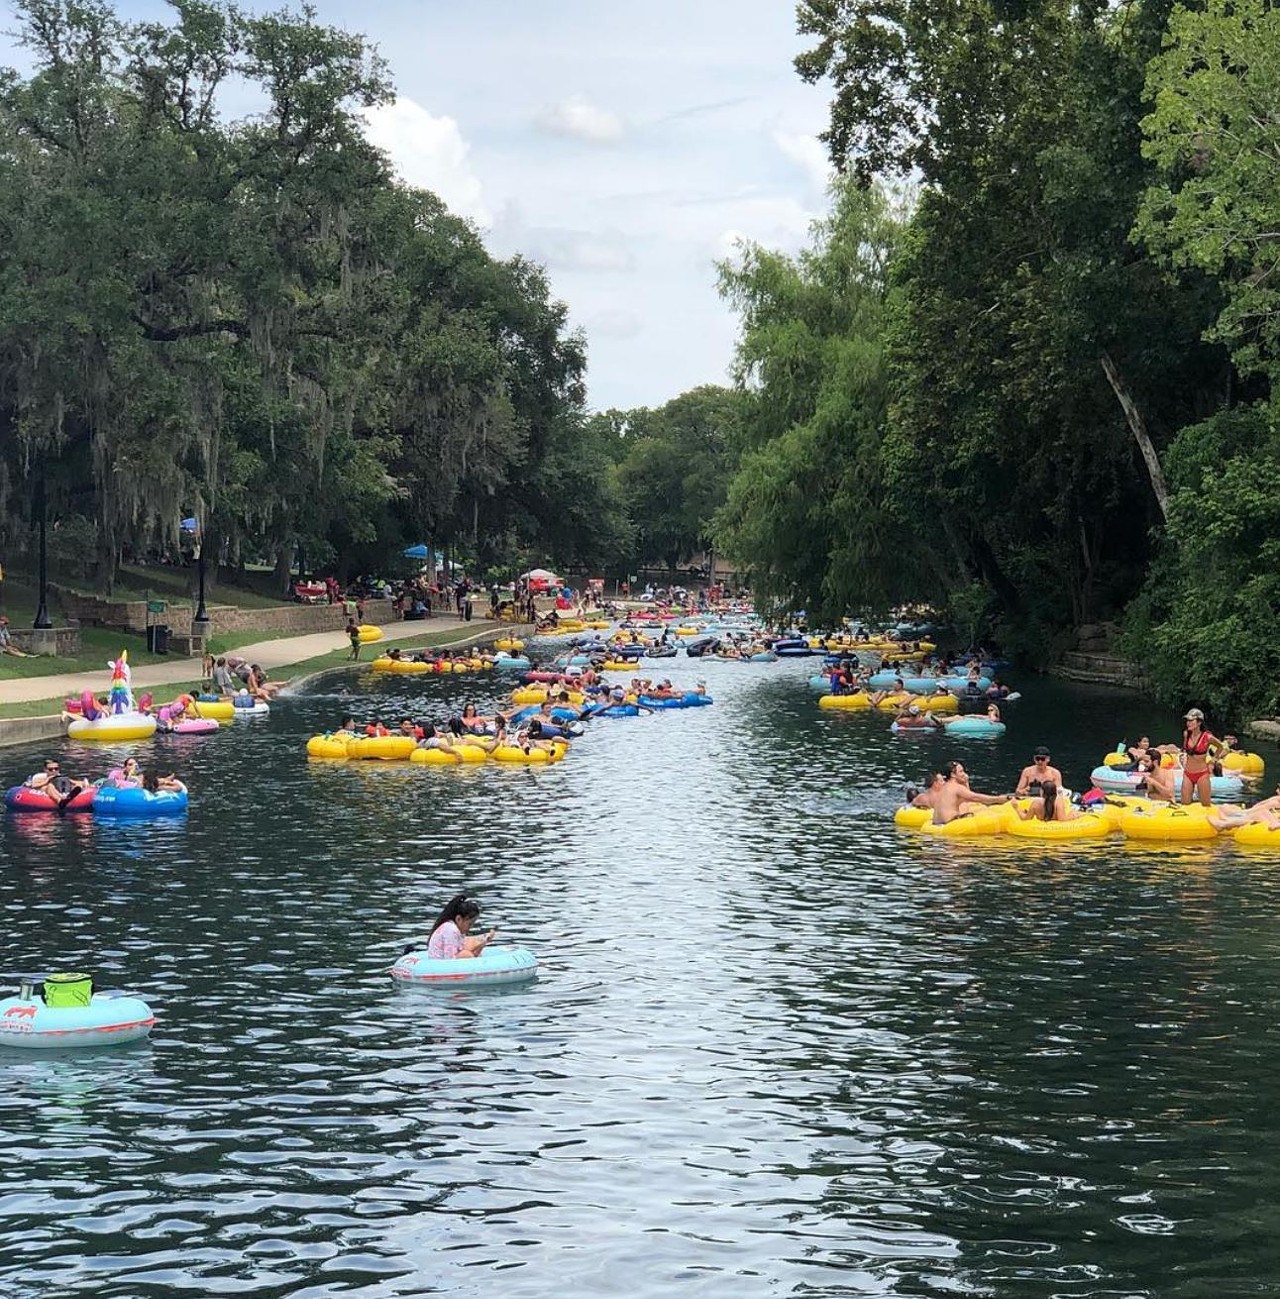 Floating down the Comal
Drunk people littering. Need we say more? It would be great if in 2019 we could all agree that messing with Texas is not cool. There are some things that you shouldn’t do even if you’re drunk – and this is one of them. Maybe once Texans know how to behave we can revisit this.
Photo via Instagram / vietspanic40